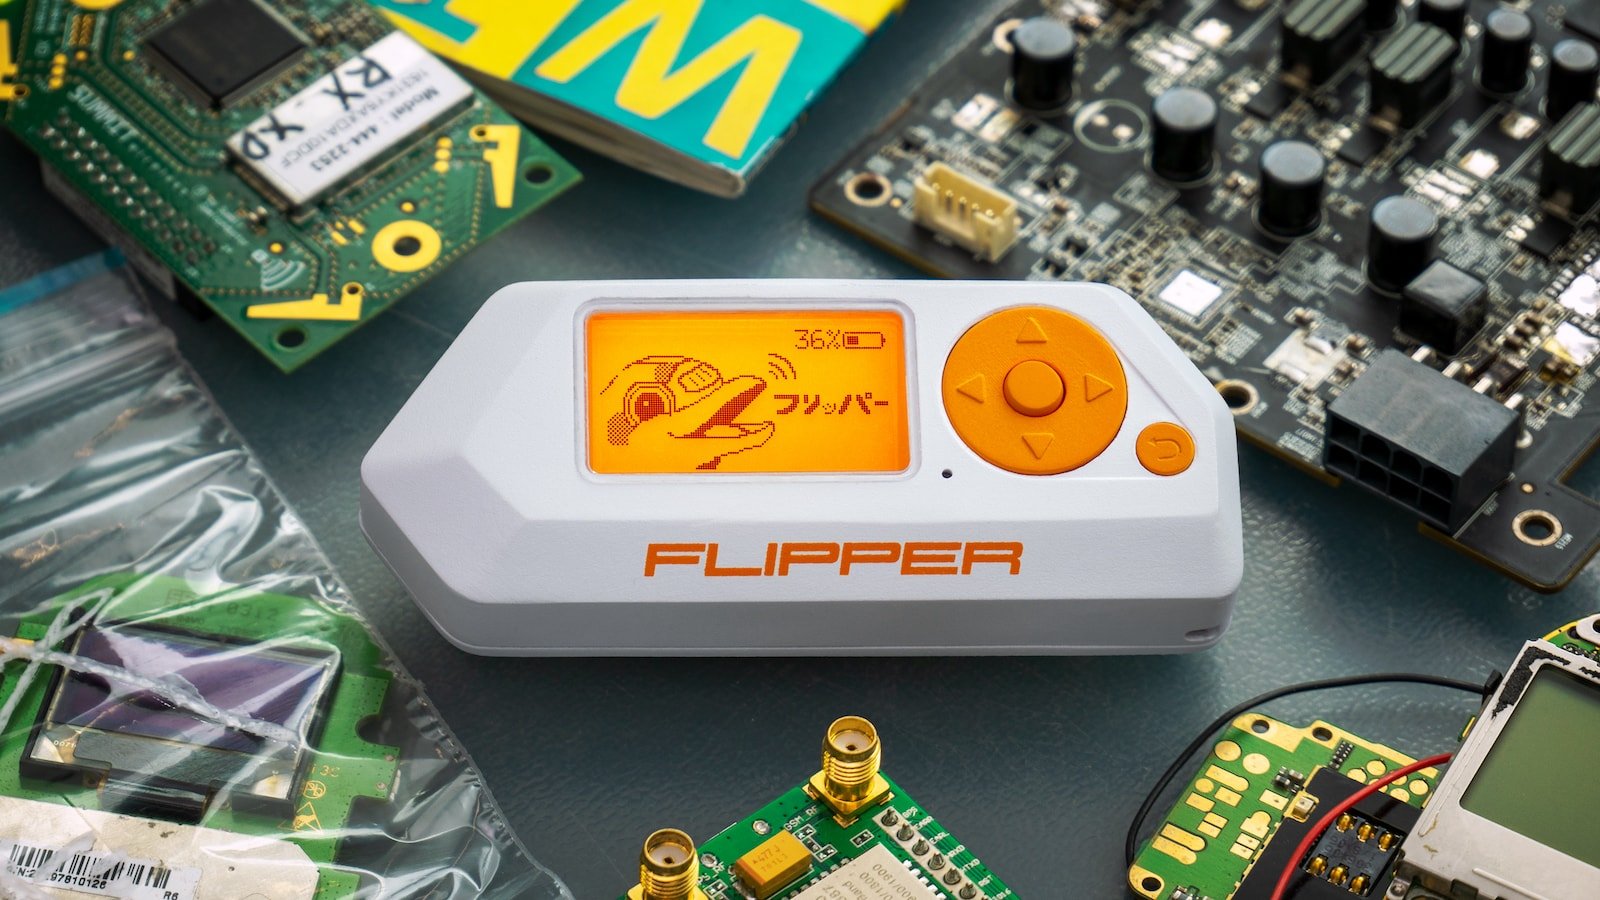 Flipper Zero hacking gadget is an open-source multitool for pentesting and more